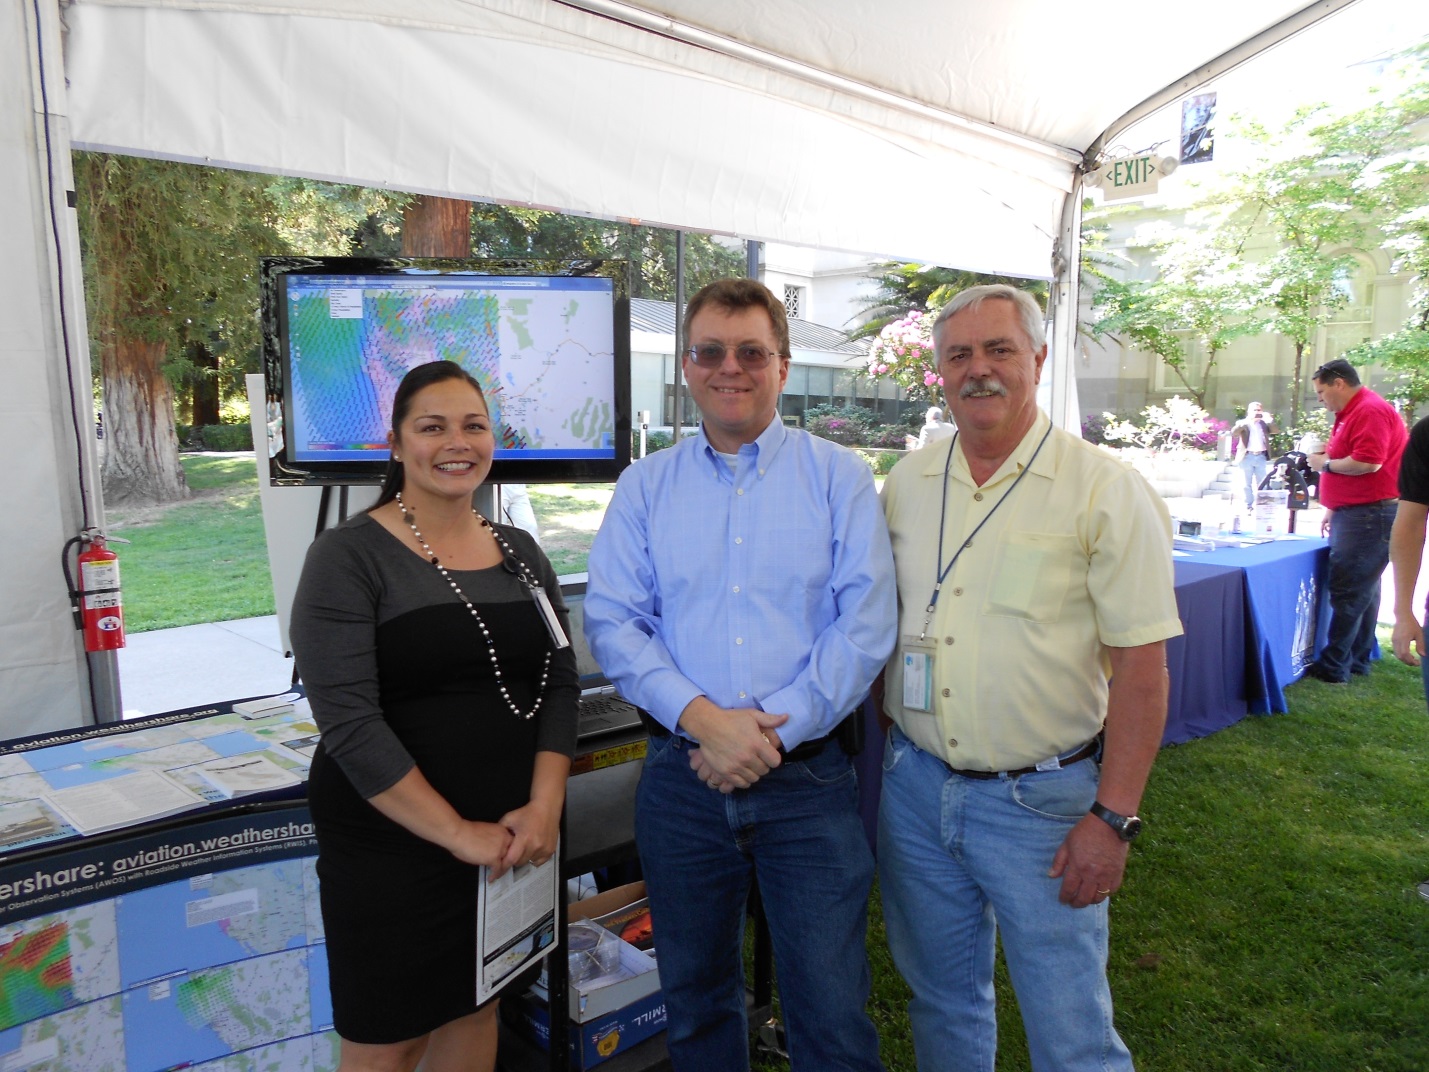 Left to right, Melissa Clark, Doug Galarus, and Terry Berrie at the 2014 California Aviation Day at the Capitol.